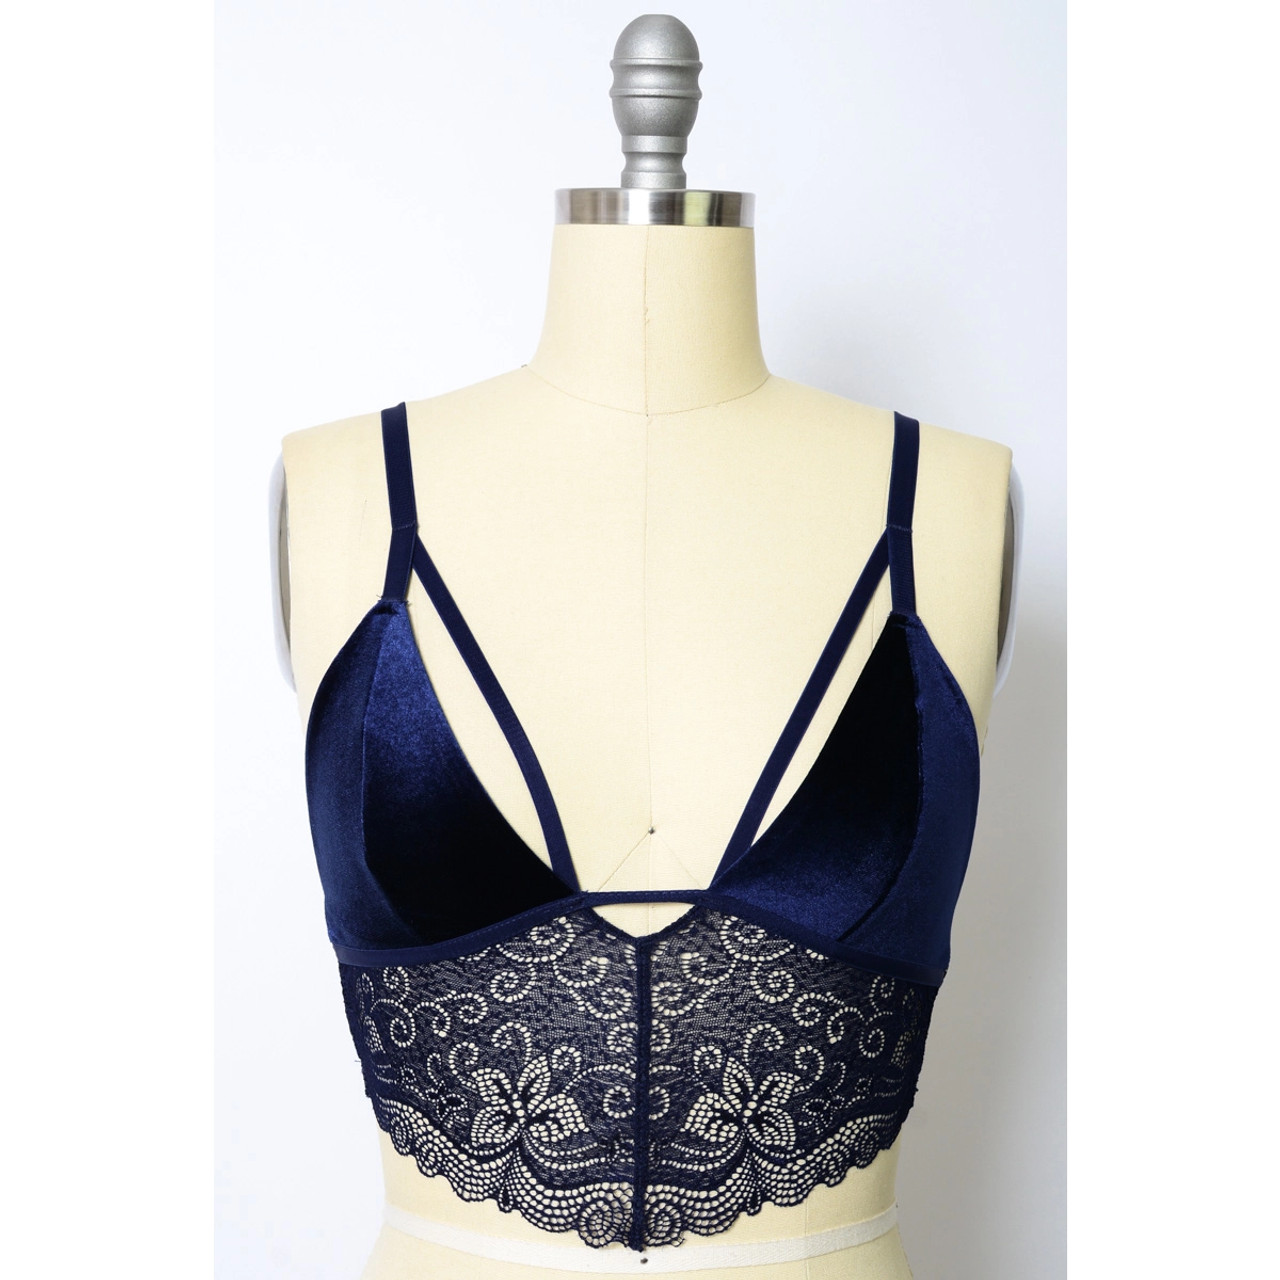 Lovely Velvet And Lace Bralette in Maroon - The Doodling Bug® Boutique